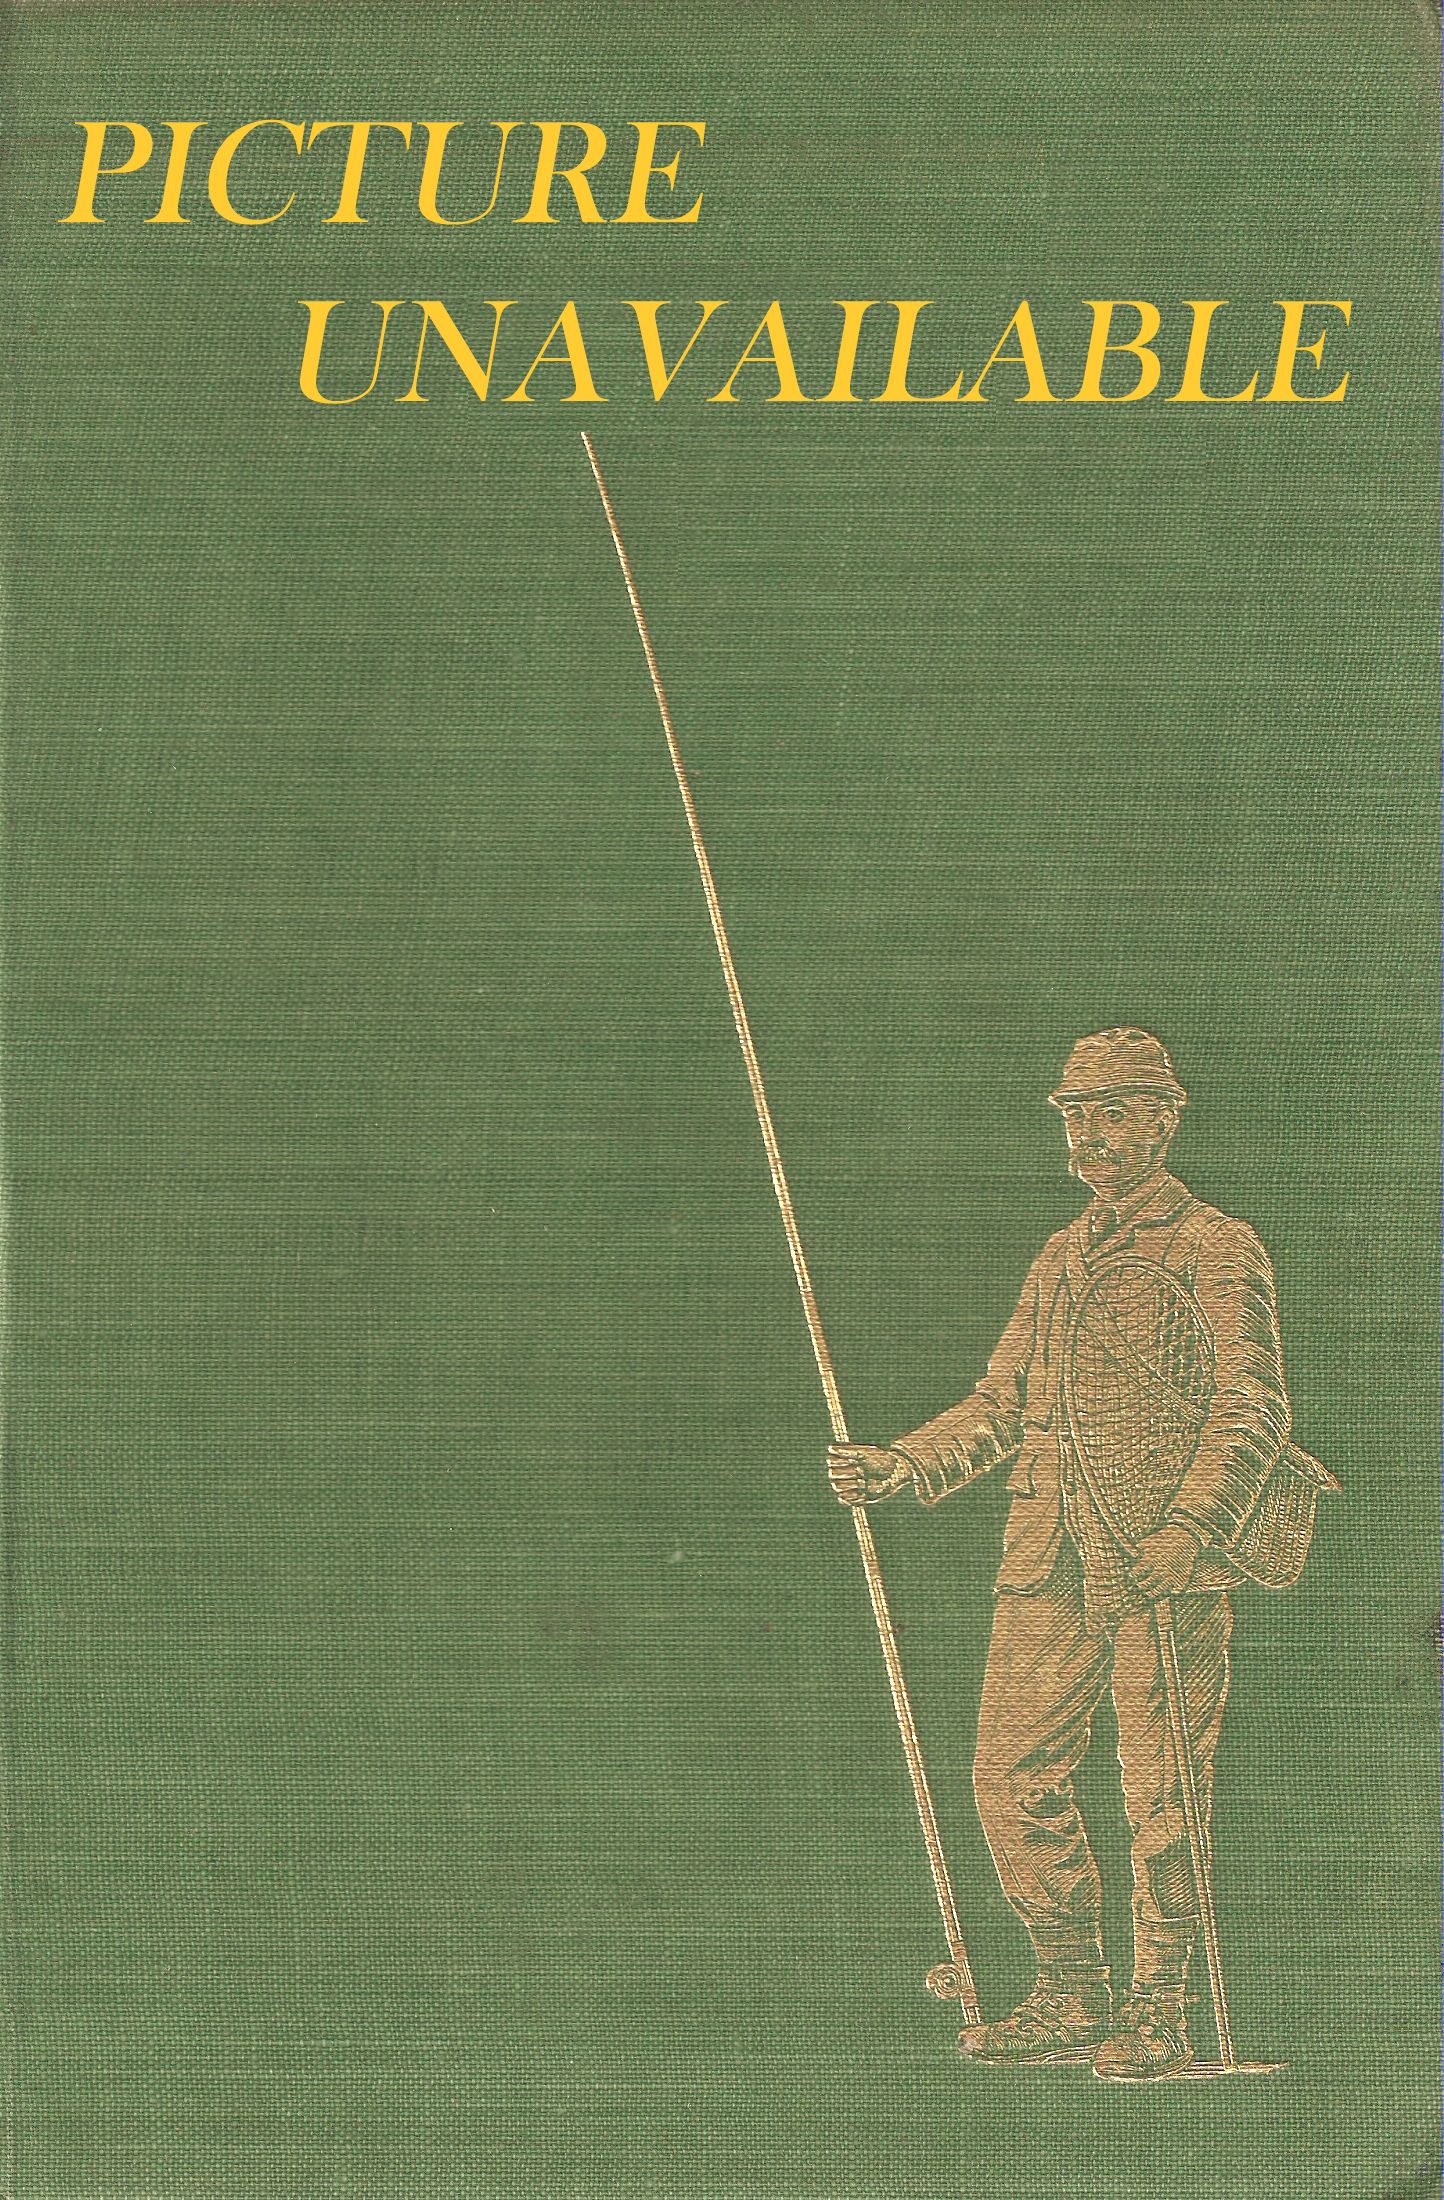 SEA-FISH: AN ACCOUNT OF THE METHODS OF ANGLING AS PRACTISED ON THE ENGLISH  COAST, WITH NOTES ON THE CAPTURE OF THE MORE SPORTING FISHES IN  CONTINENTAL, SOUTH AFRICAN, AND AUSTRALIAN WATERS. By F.G. Aflalo. The  Angler's Library Volume II.